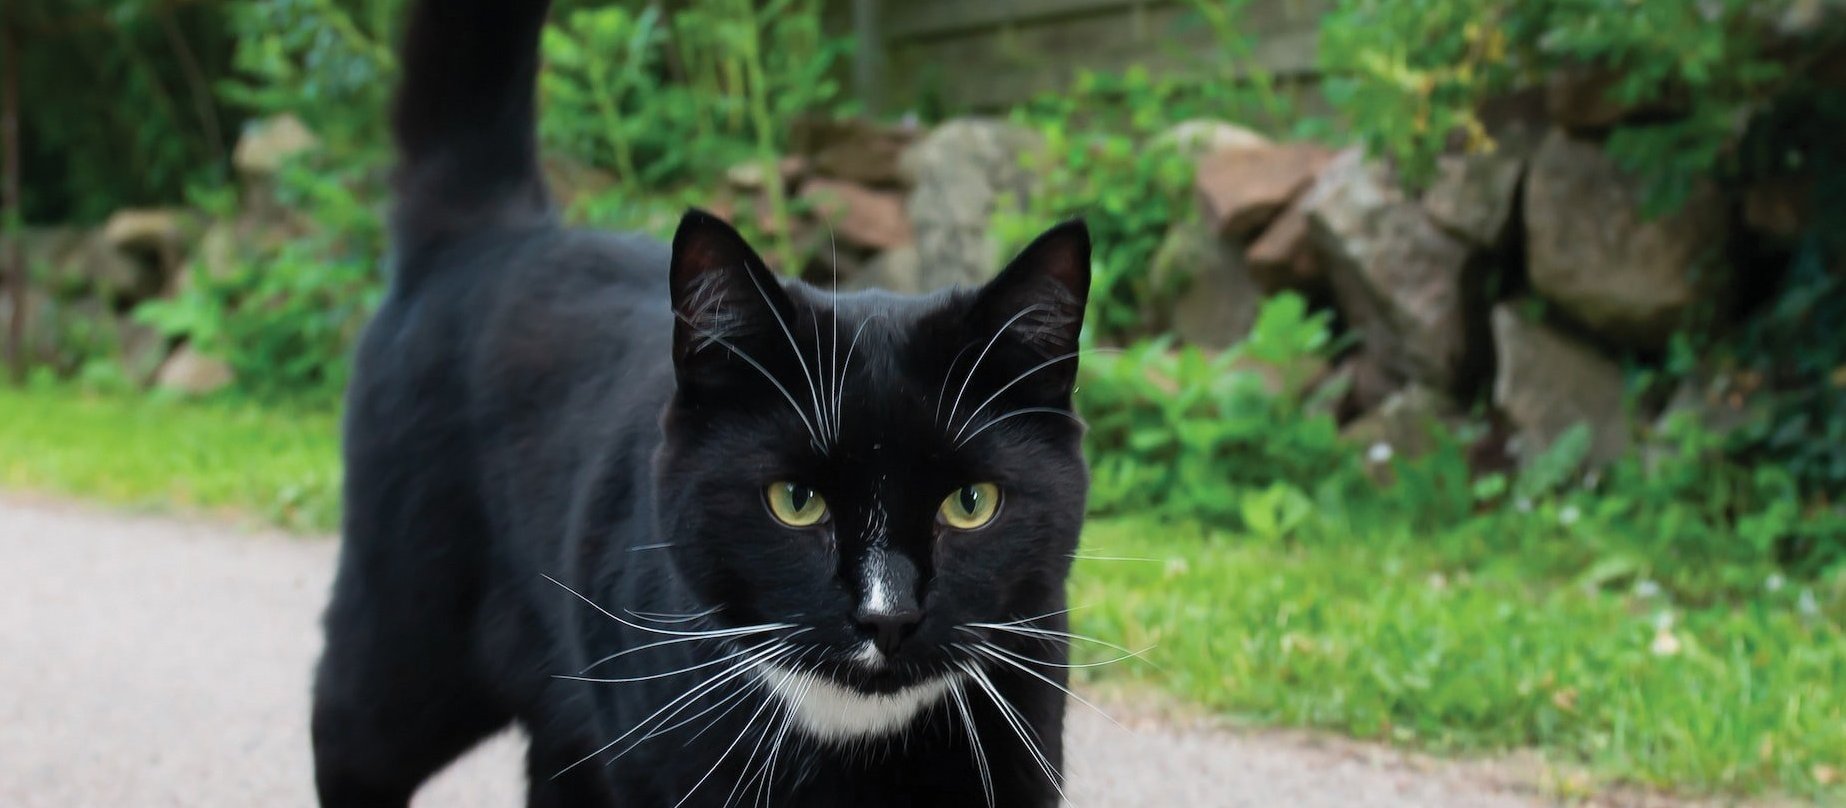 Cat_ingarden_CR_Anders-Nord-on-Unsplash_cropped